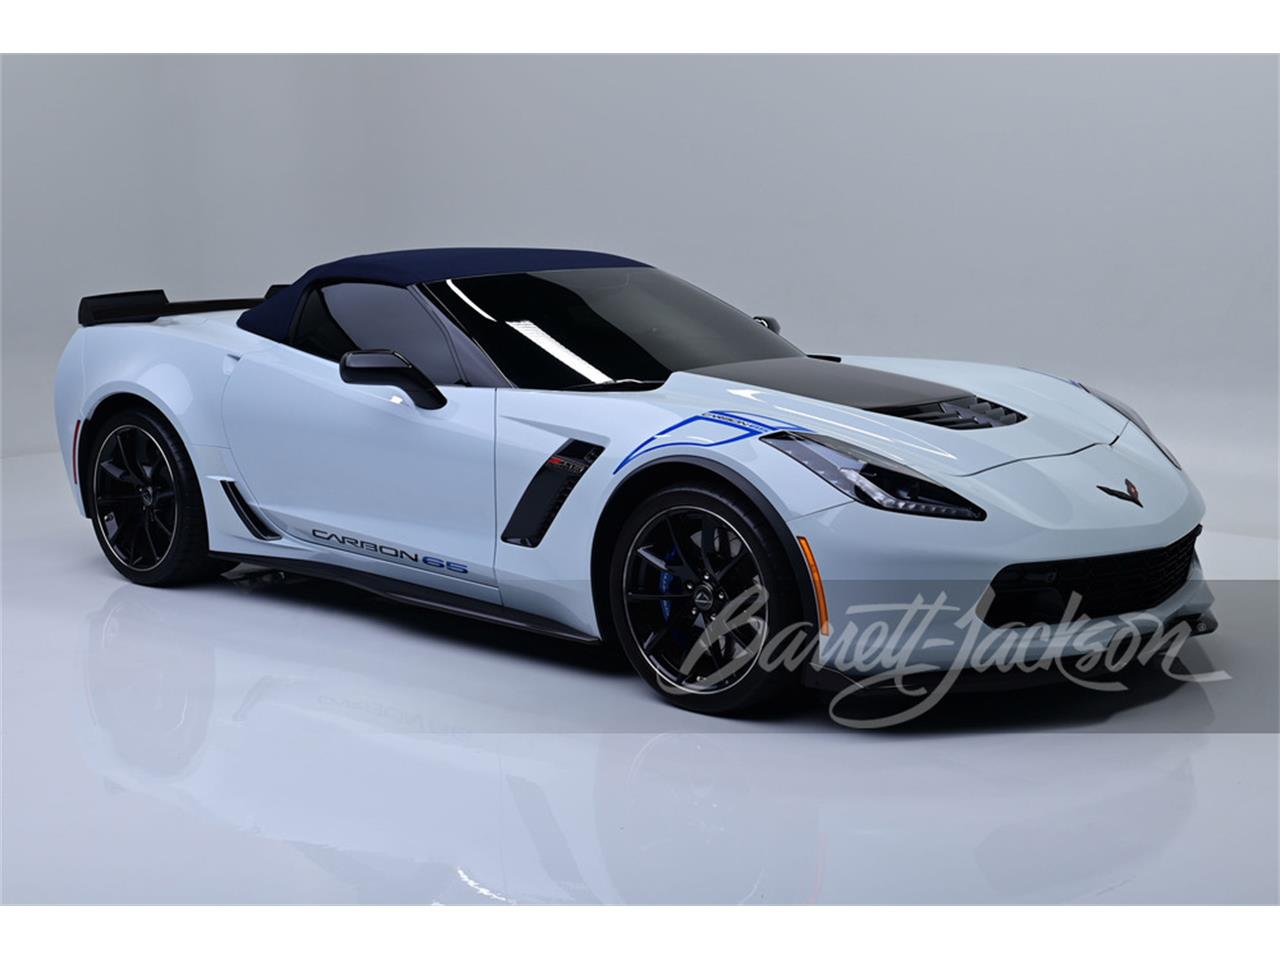 For Sale at Auction: 2018 Chevrolet Corvette in Scottsdale, Arizona for sale in Scottsdale, AZ